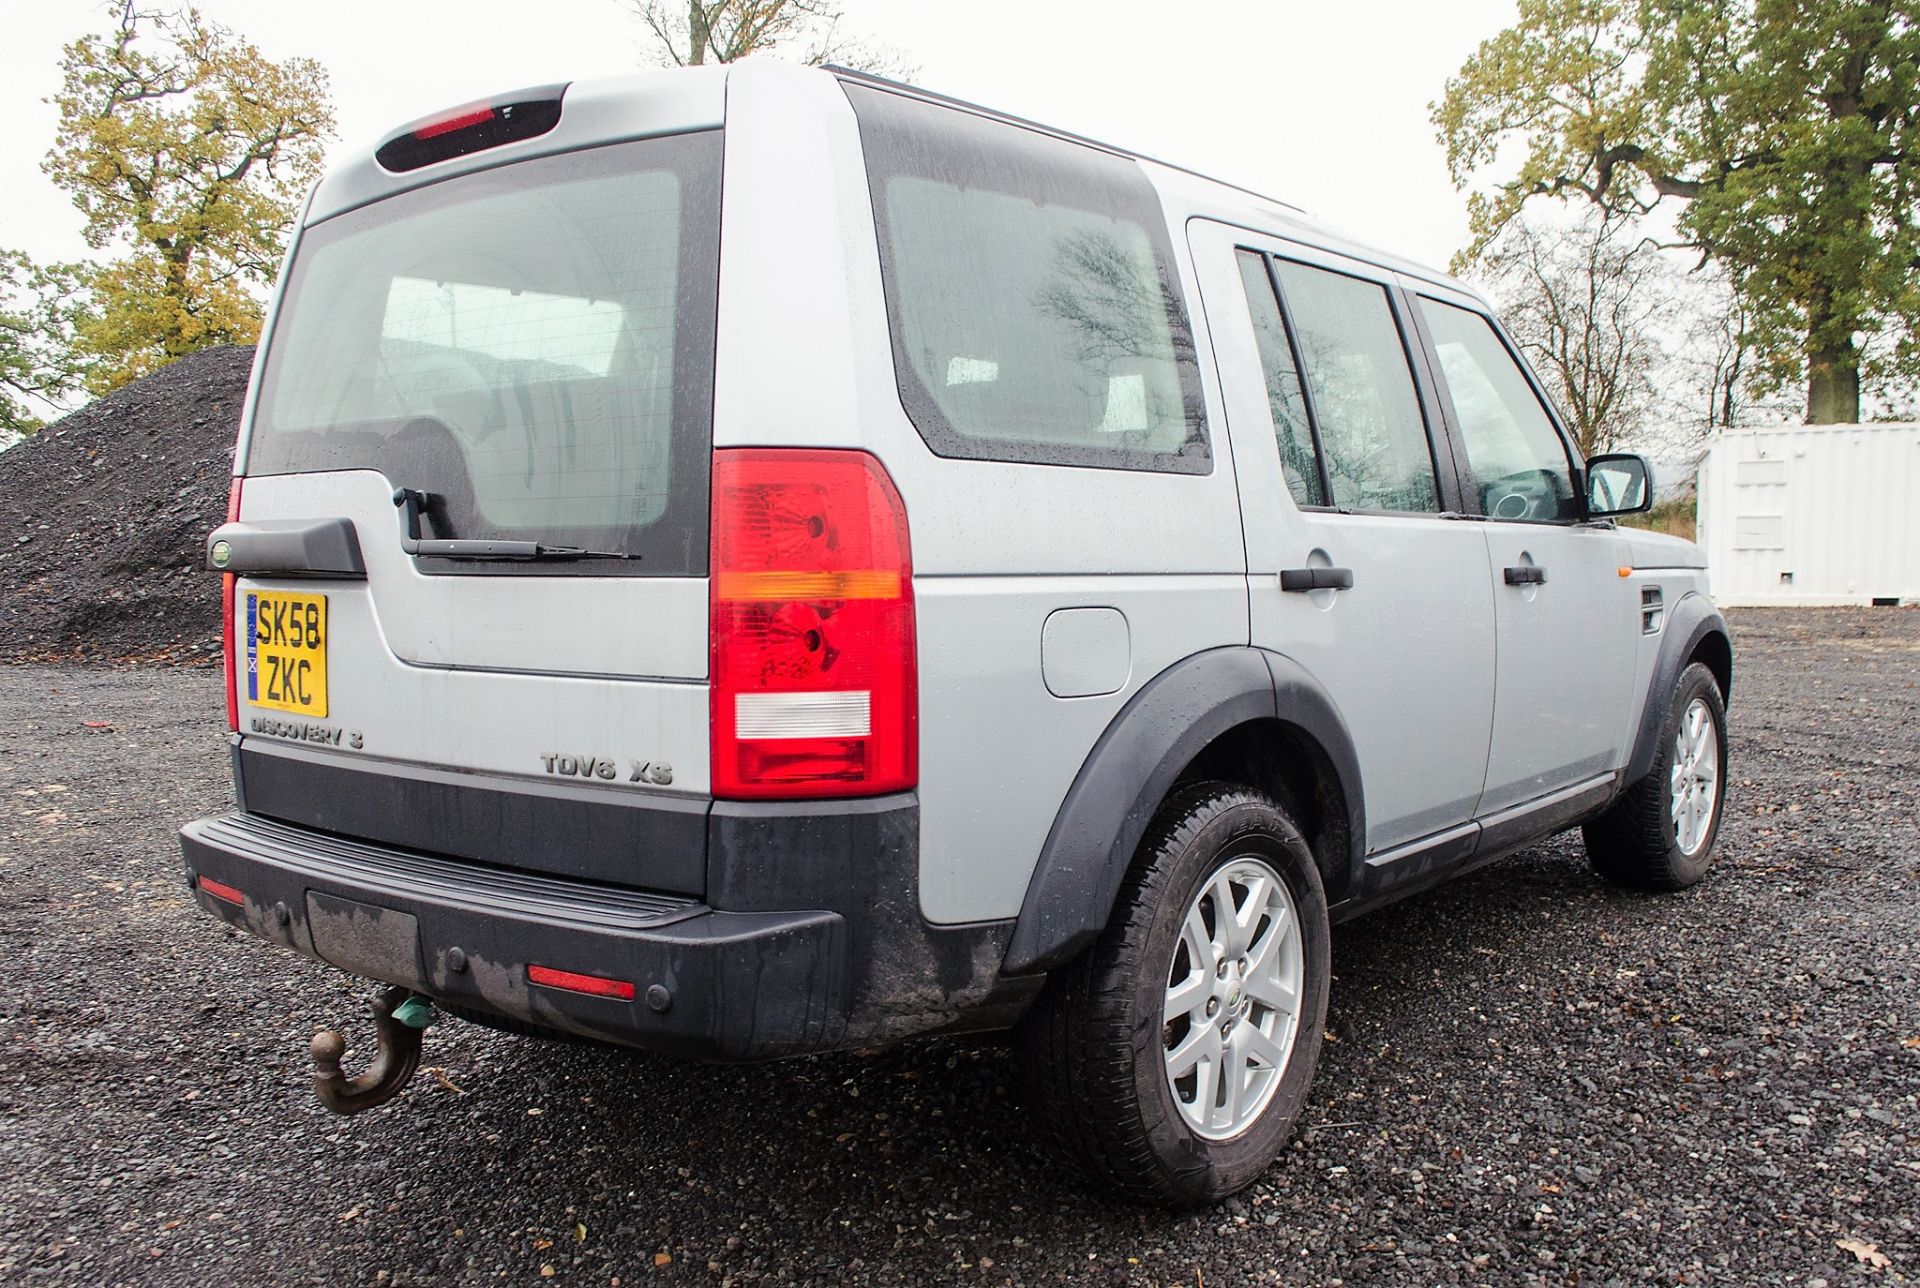 Land Rover Discovery 3 TDV6 XS 5 door 4wd estate car Registration Number: SK58 ZKC Date of - Image 3 of 31